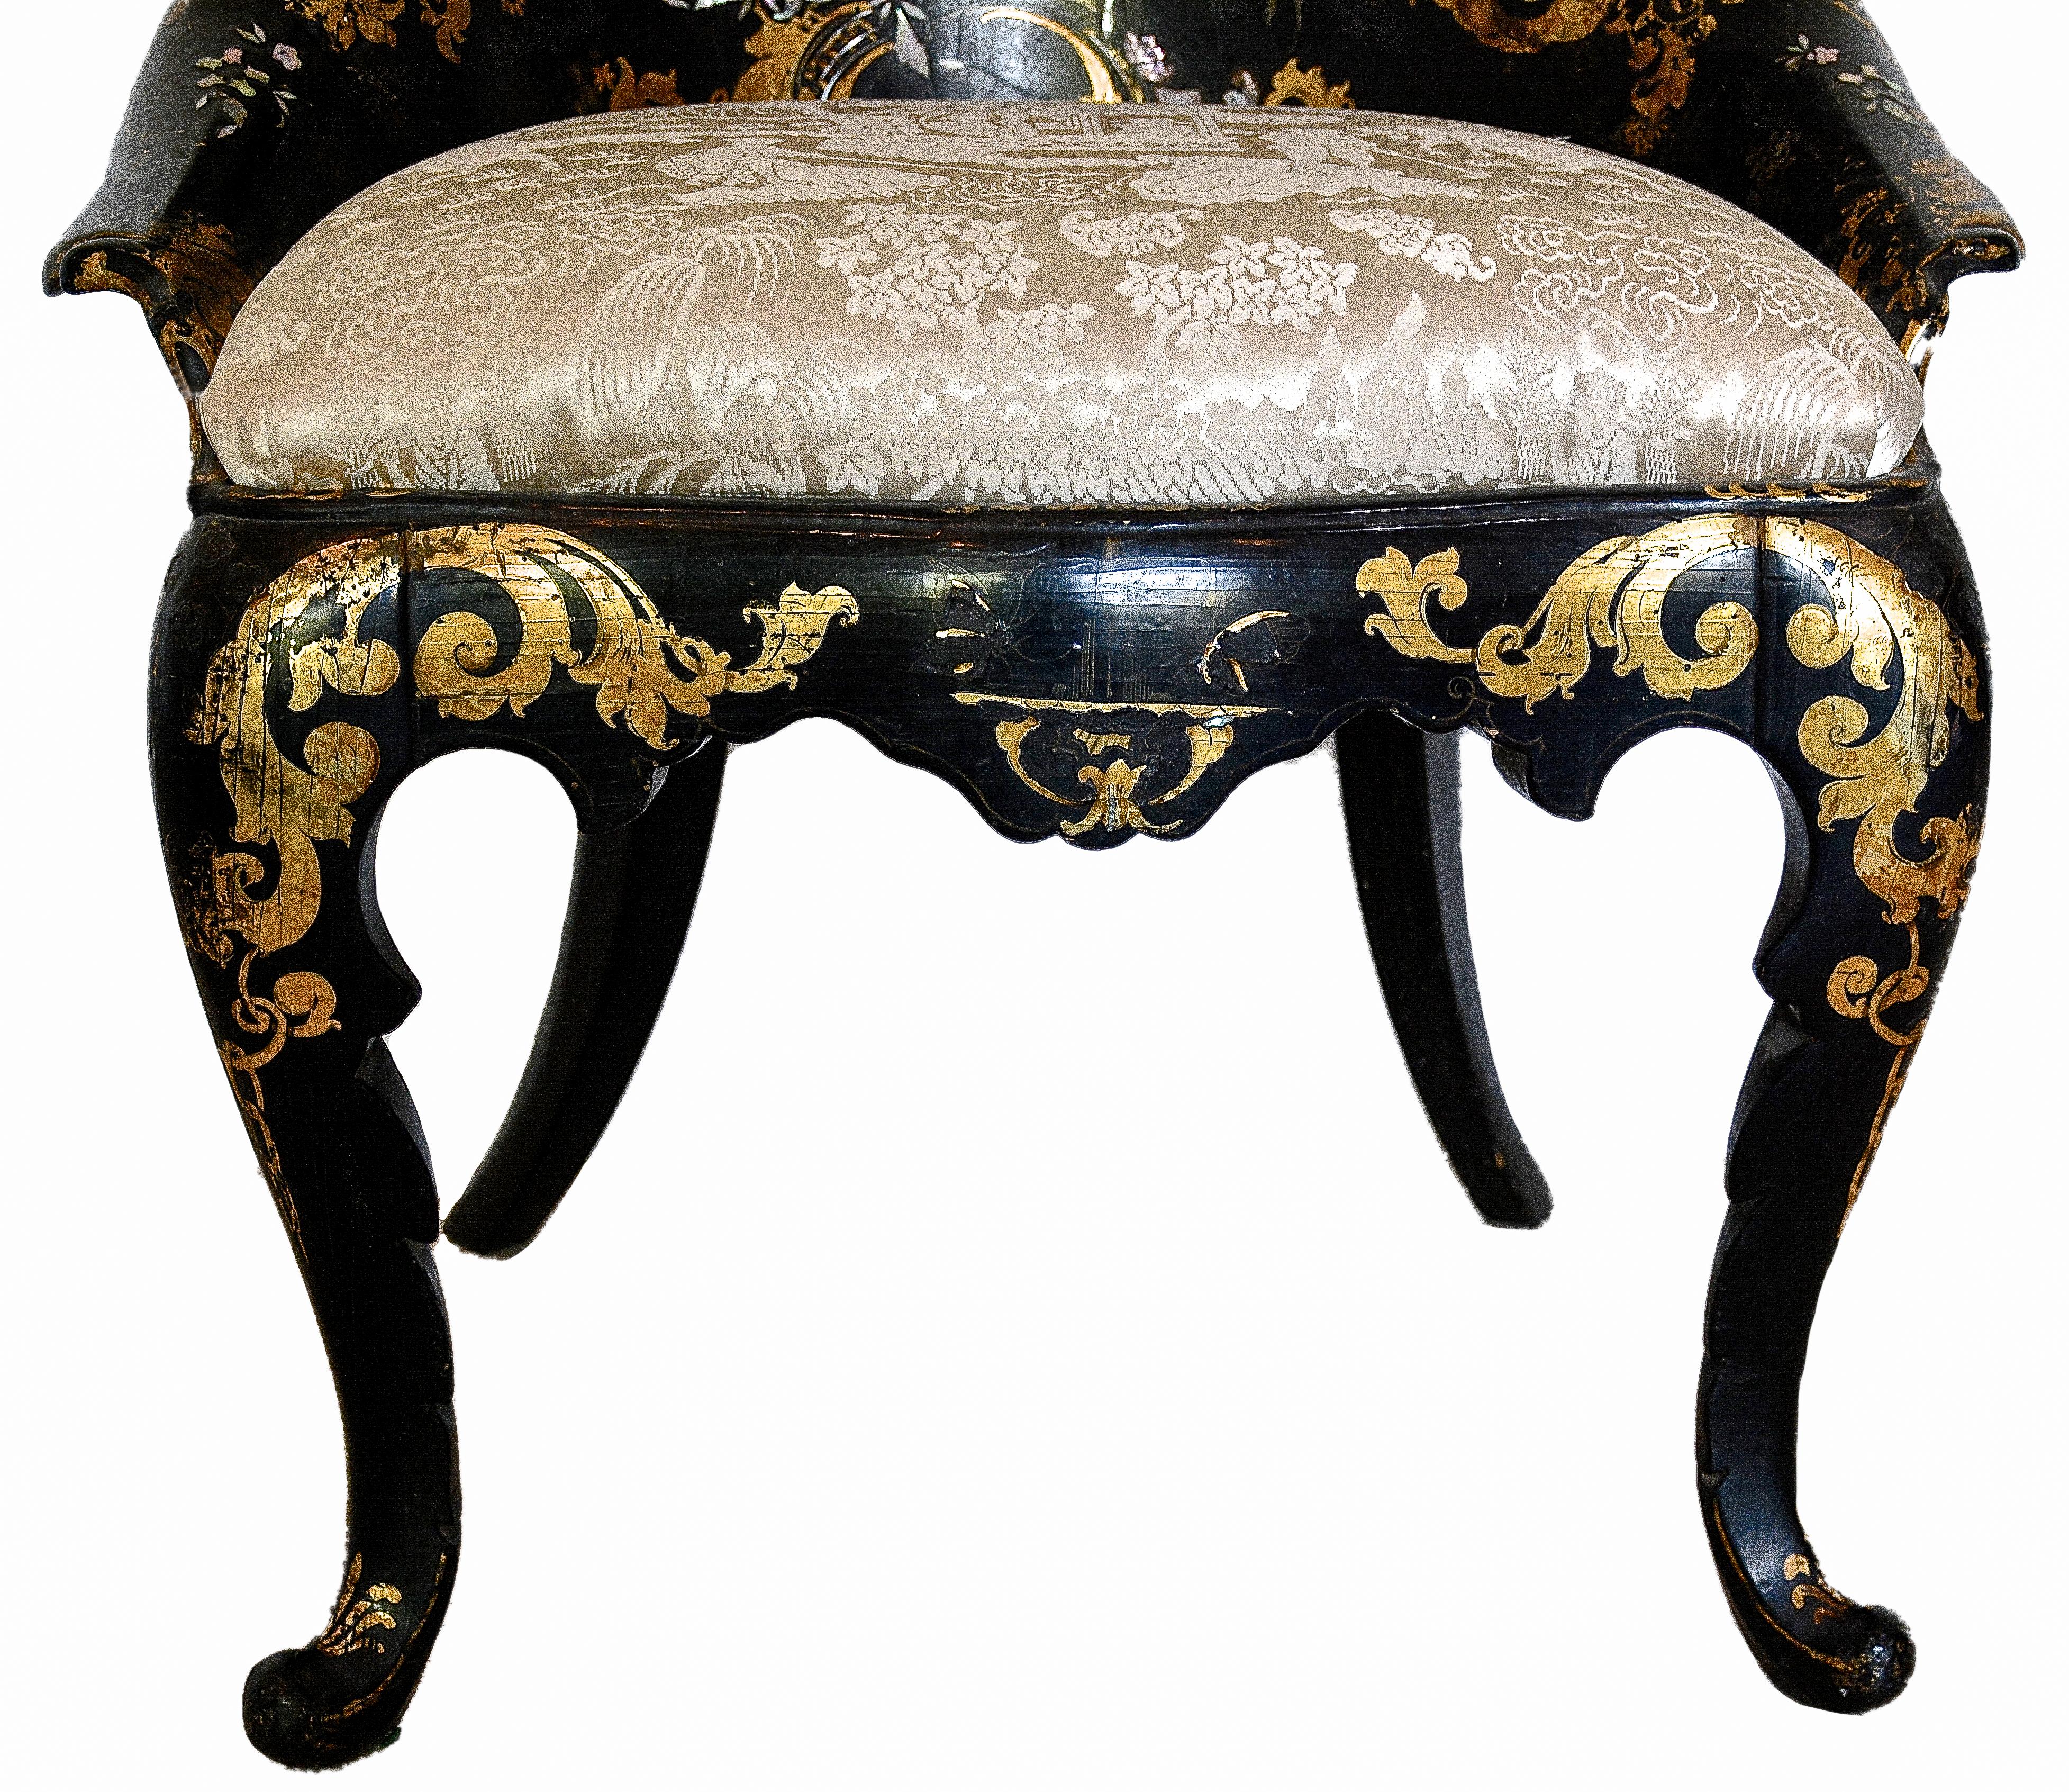 19th Century Victorian inlaid mother-of-pearl & gilt papier mache chair.

This elegantly shaped chair is detailed with Mother Of Pearl inlaid patterns of flowers and birds in flight, highlighted with gilt ornamentation throughout. The gentle